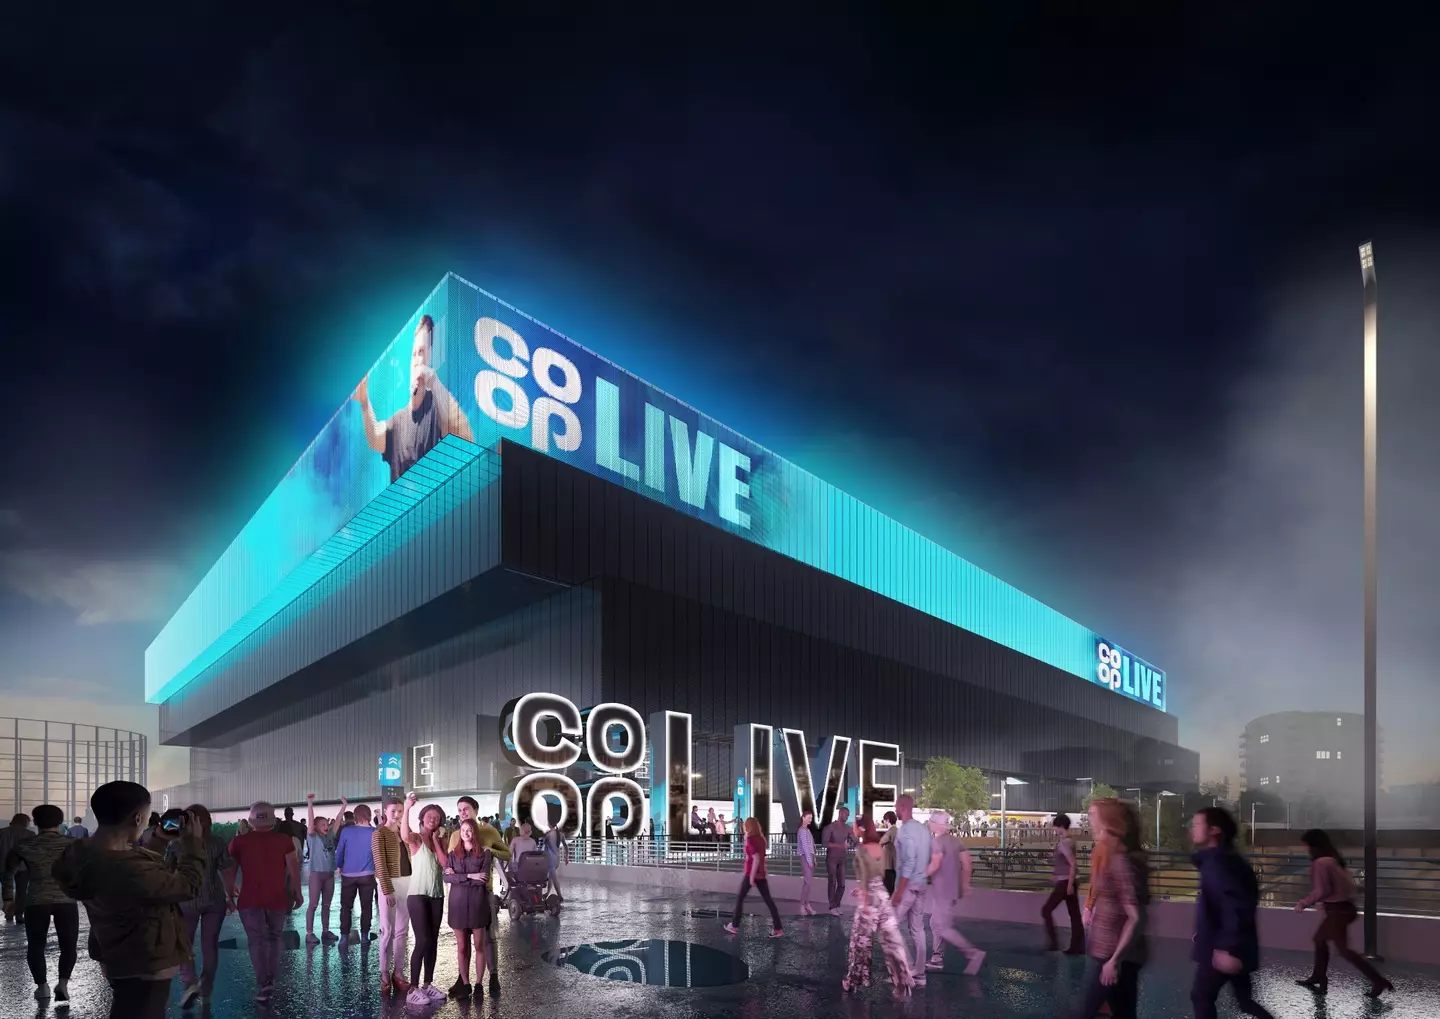 Music fans have been given a first look inside Britain’s largest arena which is opening in December next year.